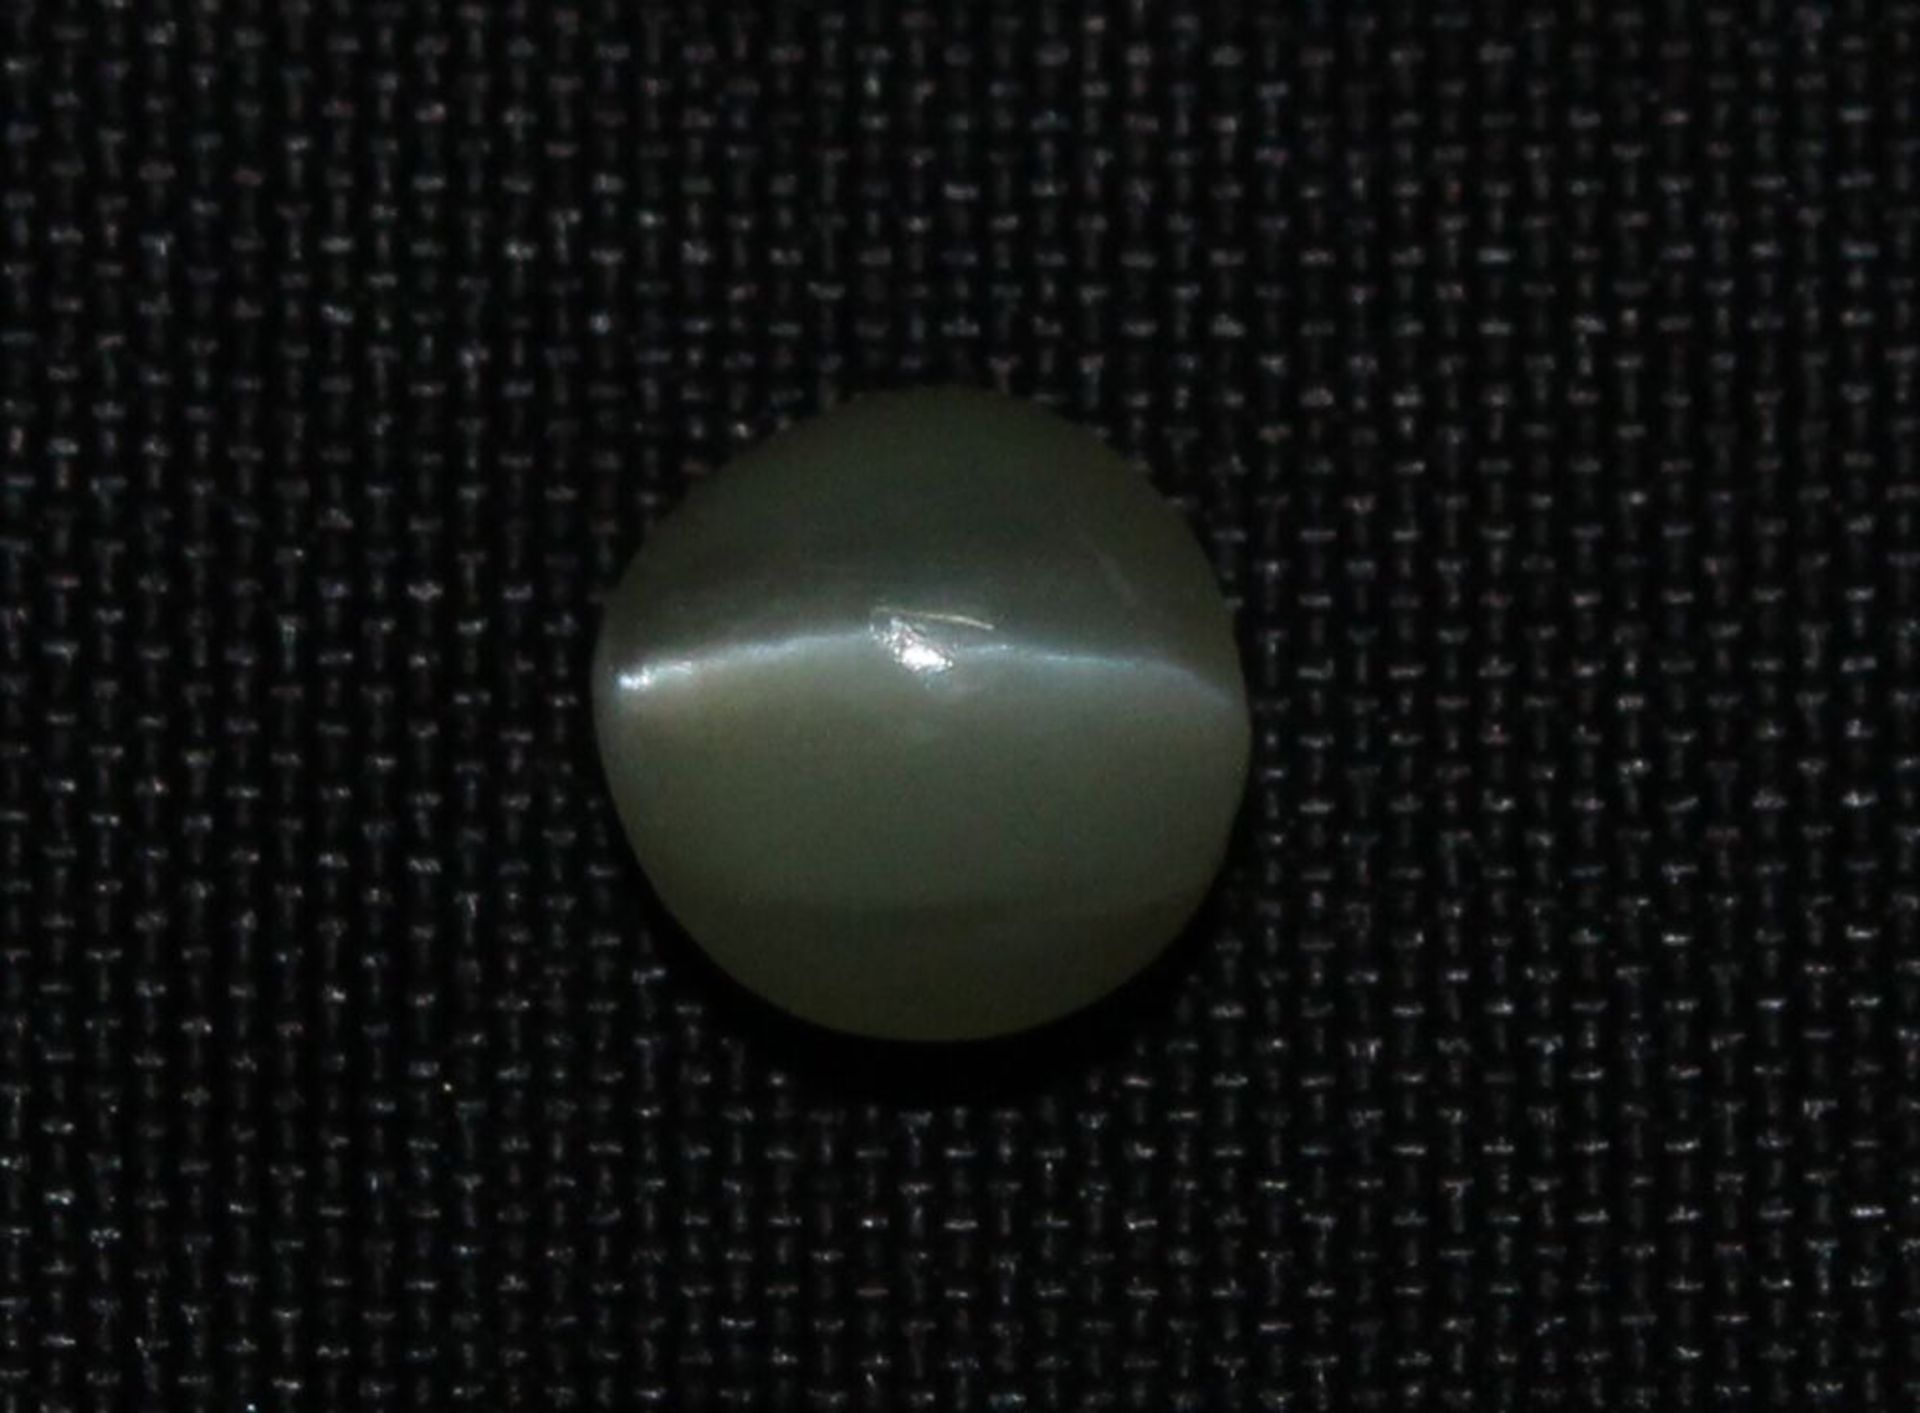 0.66 Ct Igi Certified Chrysoberyl Cat's Eye - Without Reserve - Image 2 of 3